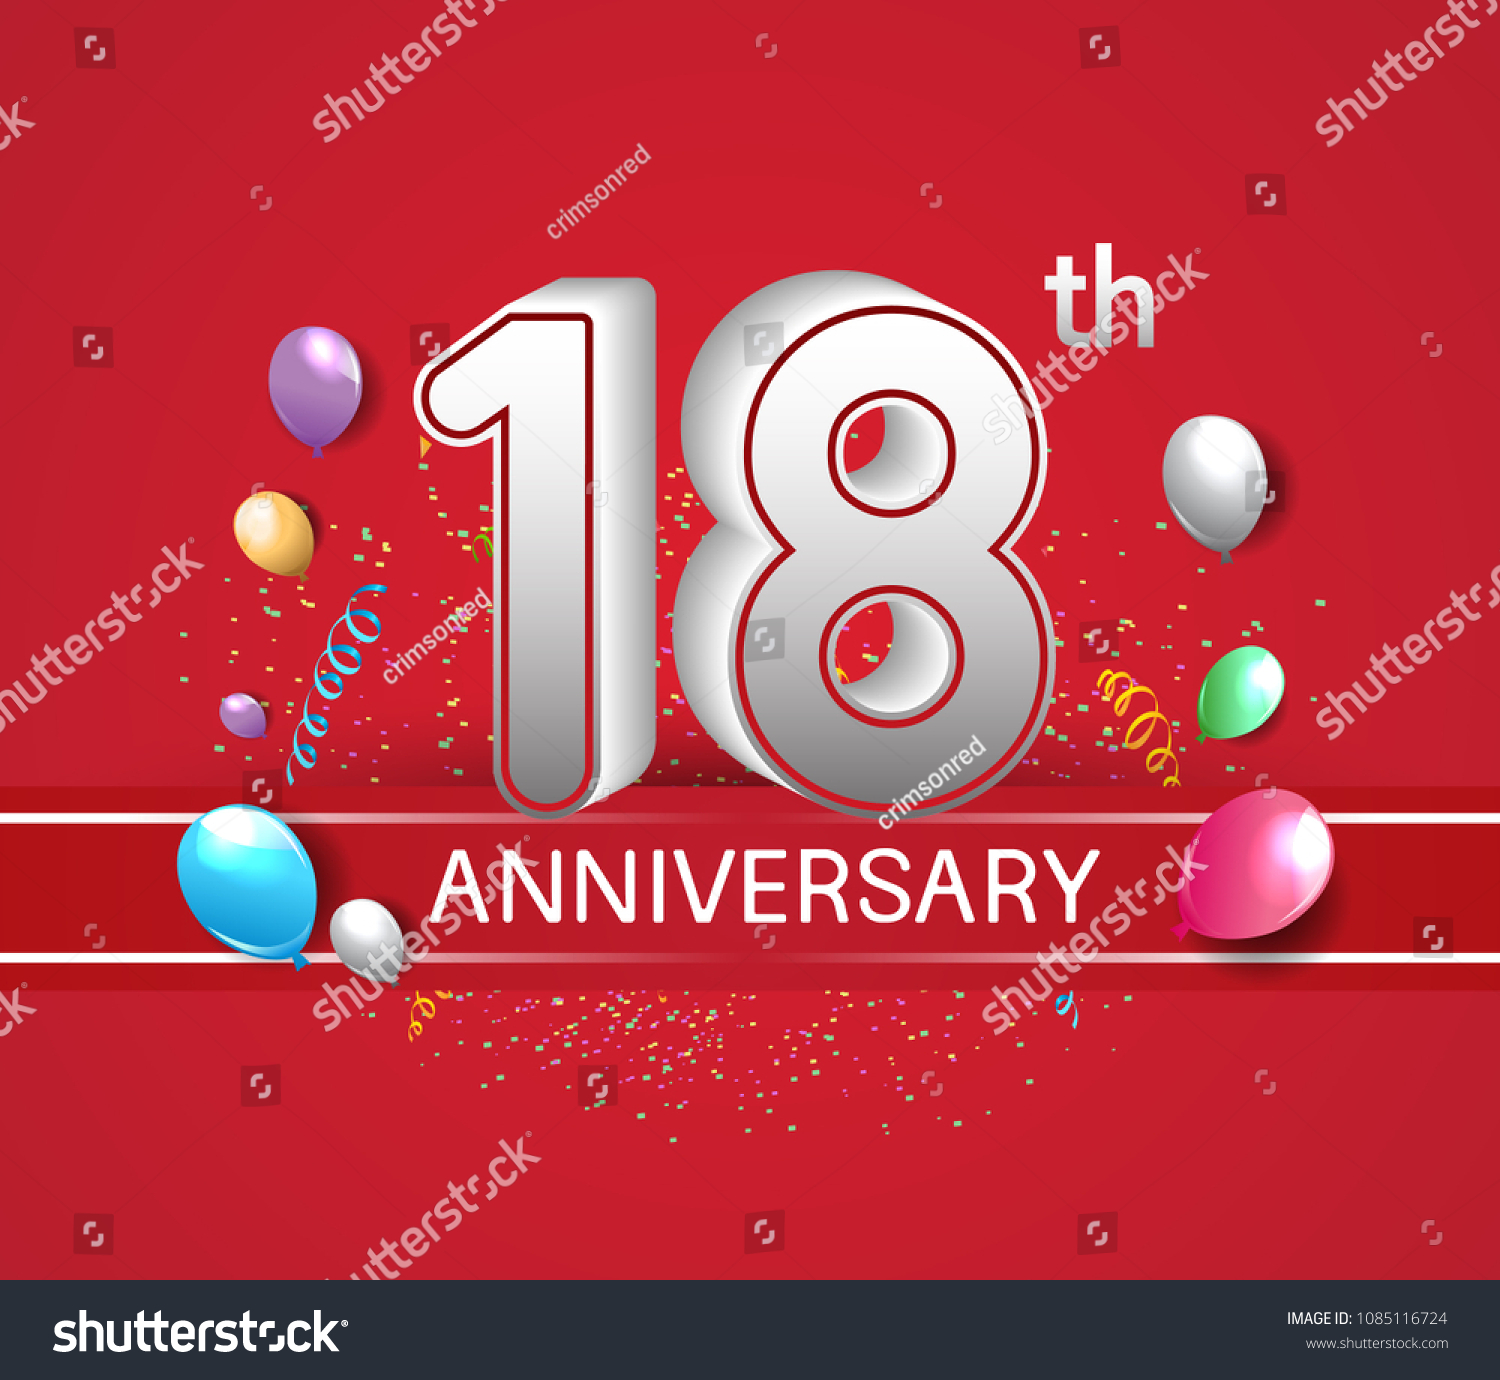 18th anniversary design red background with - Royalty Free Stock Vector ...